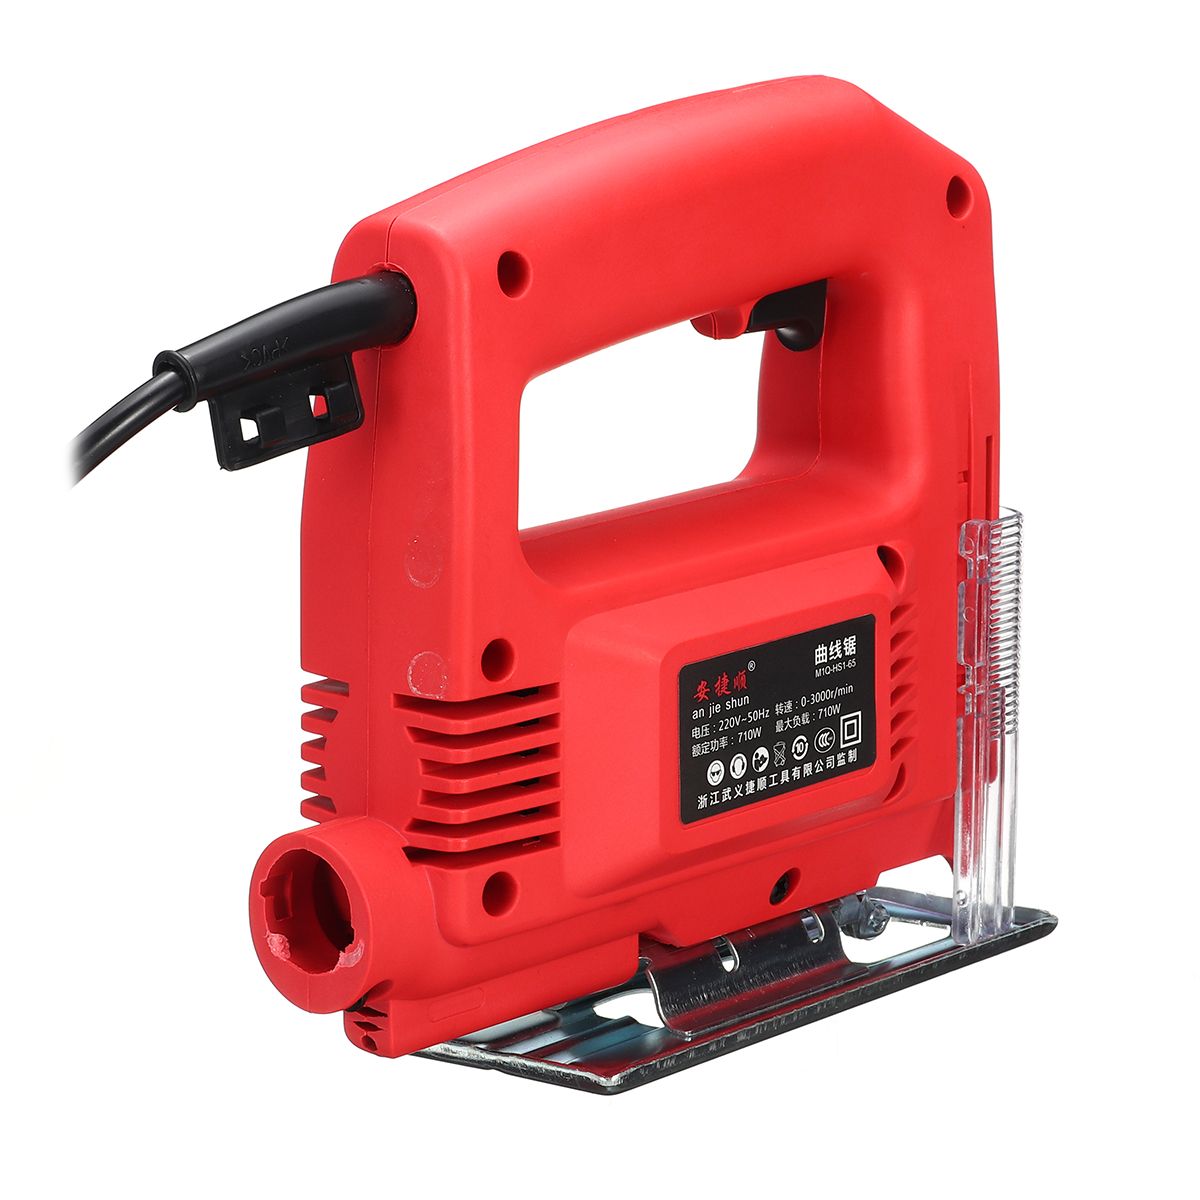 710W-220V-Electric-Jig-Saw-Variable-Speed-Power-Metal-Wood-Cutting-Woodworking-Tool-1575354